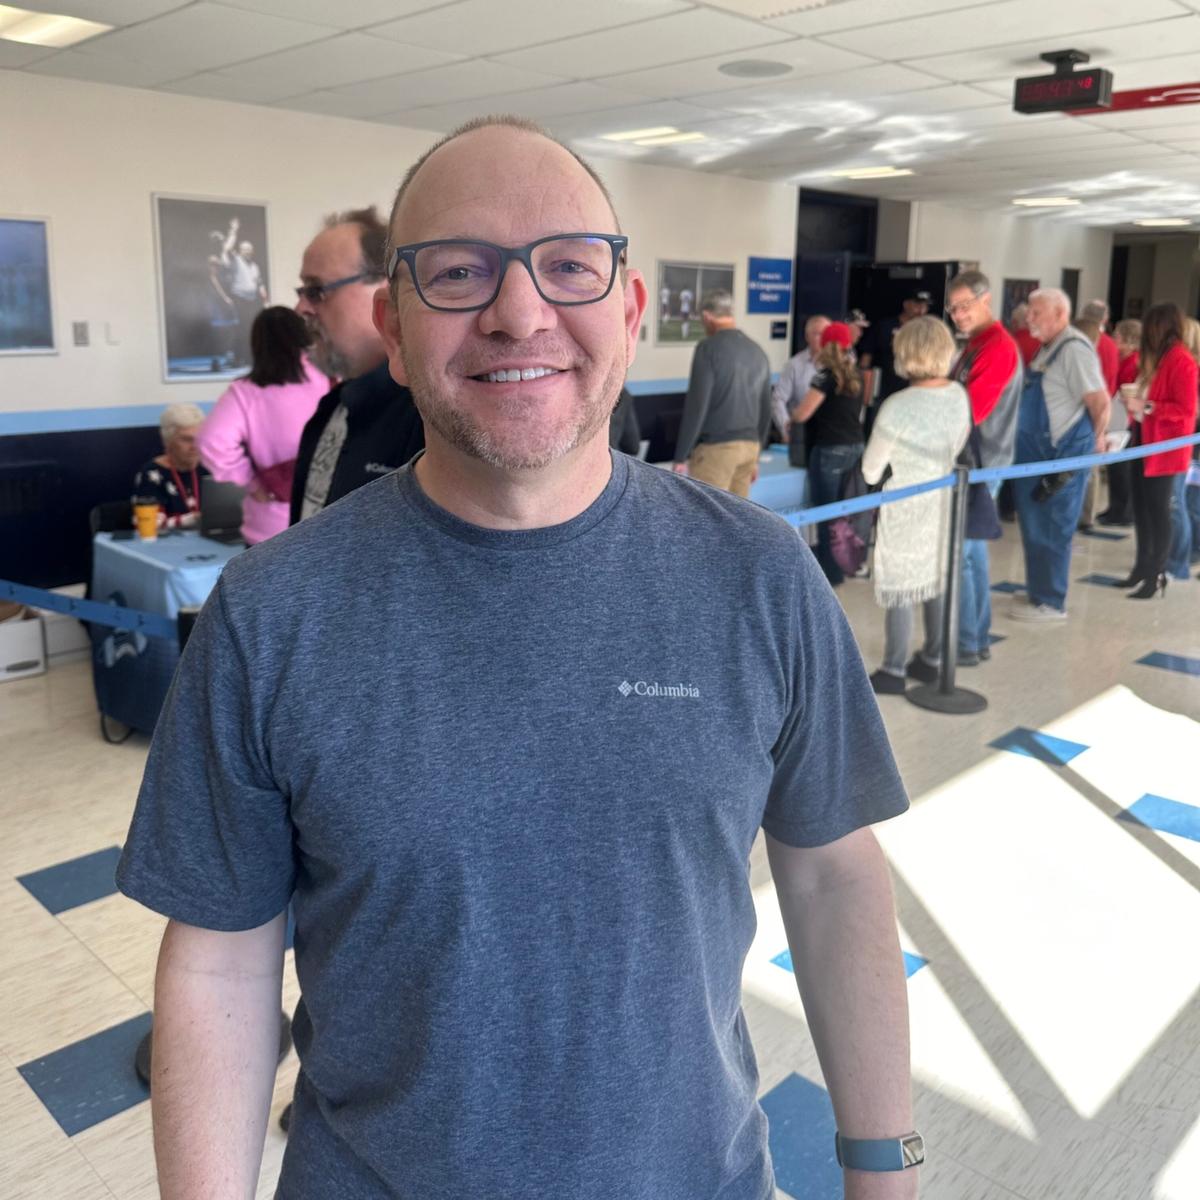 Keith Bennett, of Kansas City, Missouri, said he will caucus for former President Donald Trump at the Clay County, Missouri, Republican Caucus in Kansas City on Saturday, March 2, 2024. (Austin Alonzo/The Epoch Times)